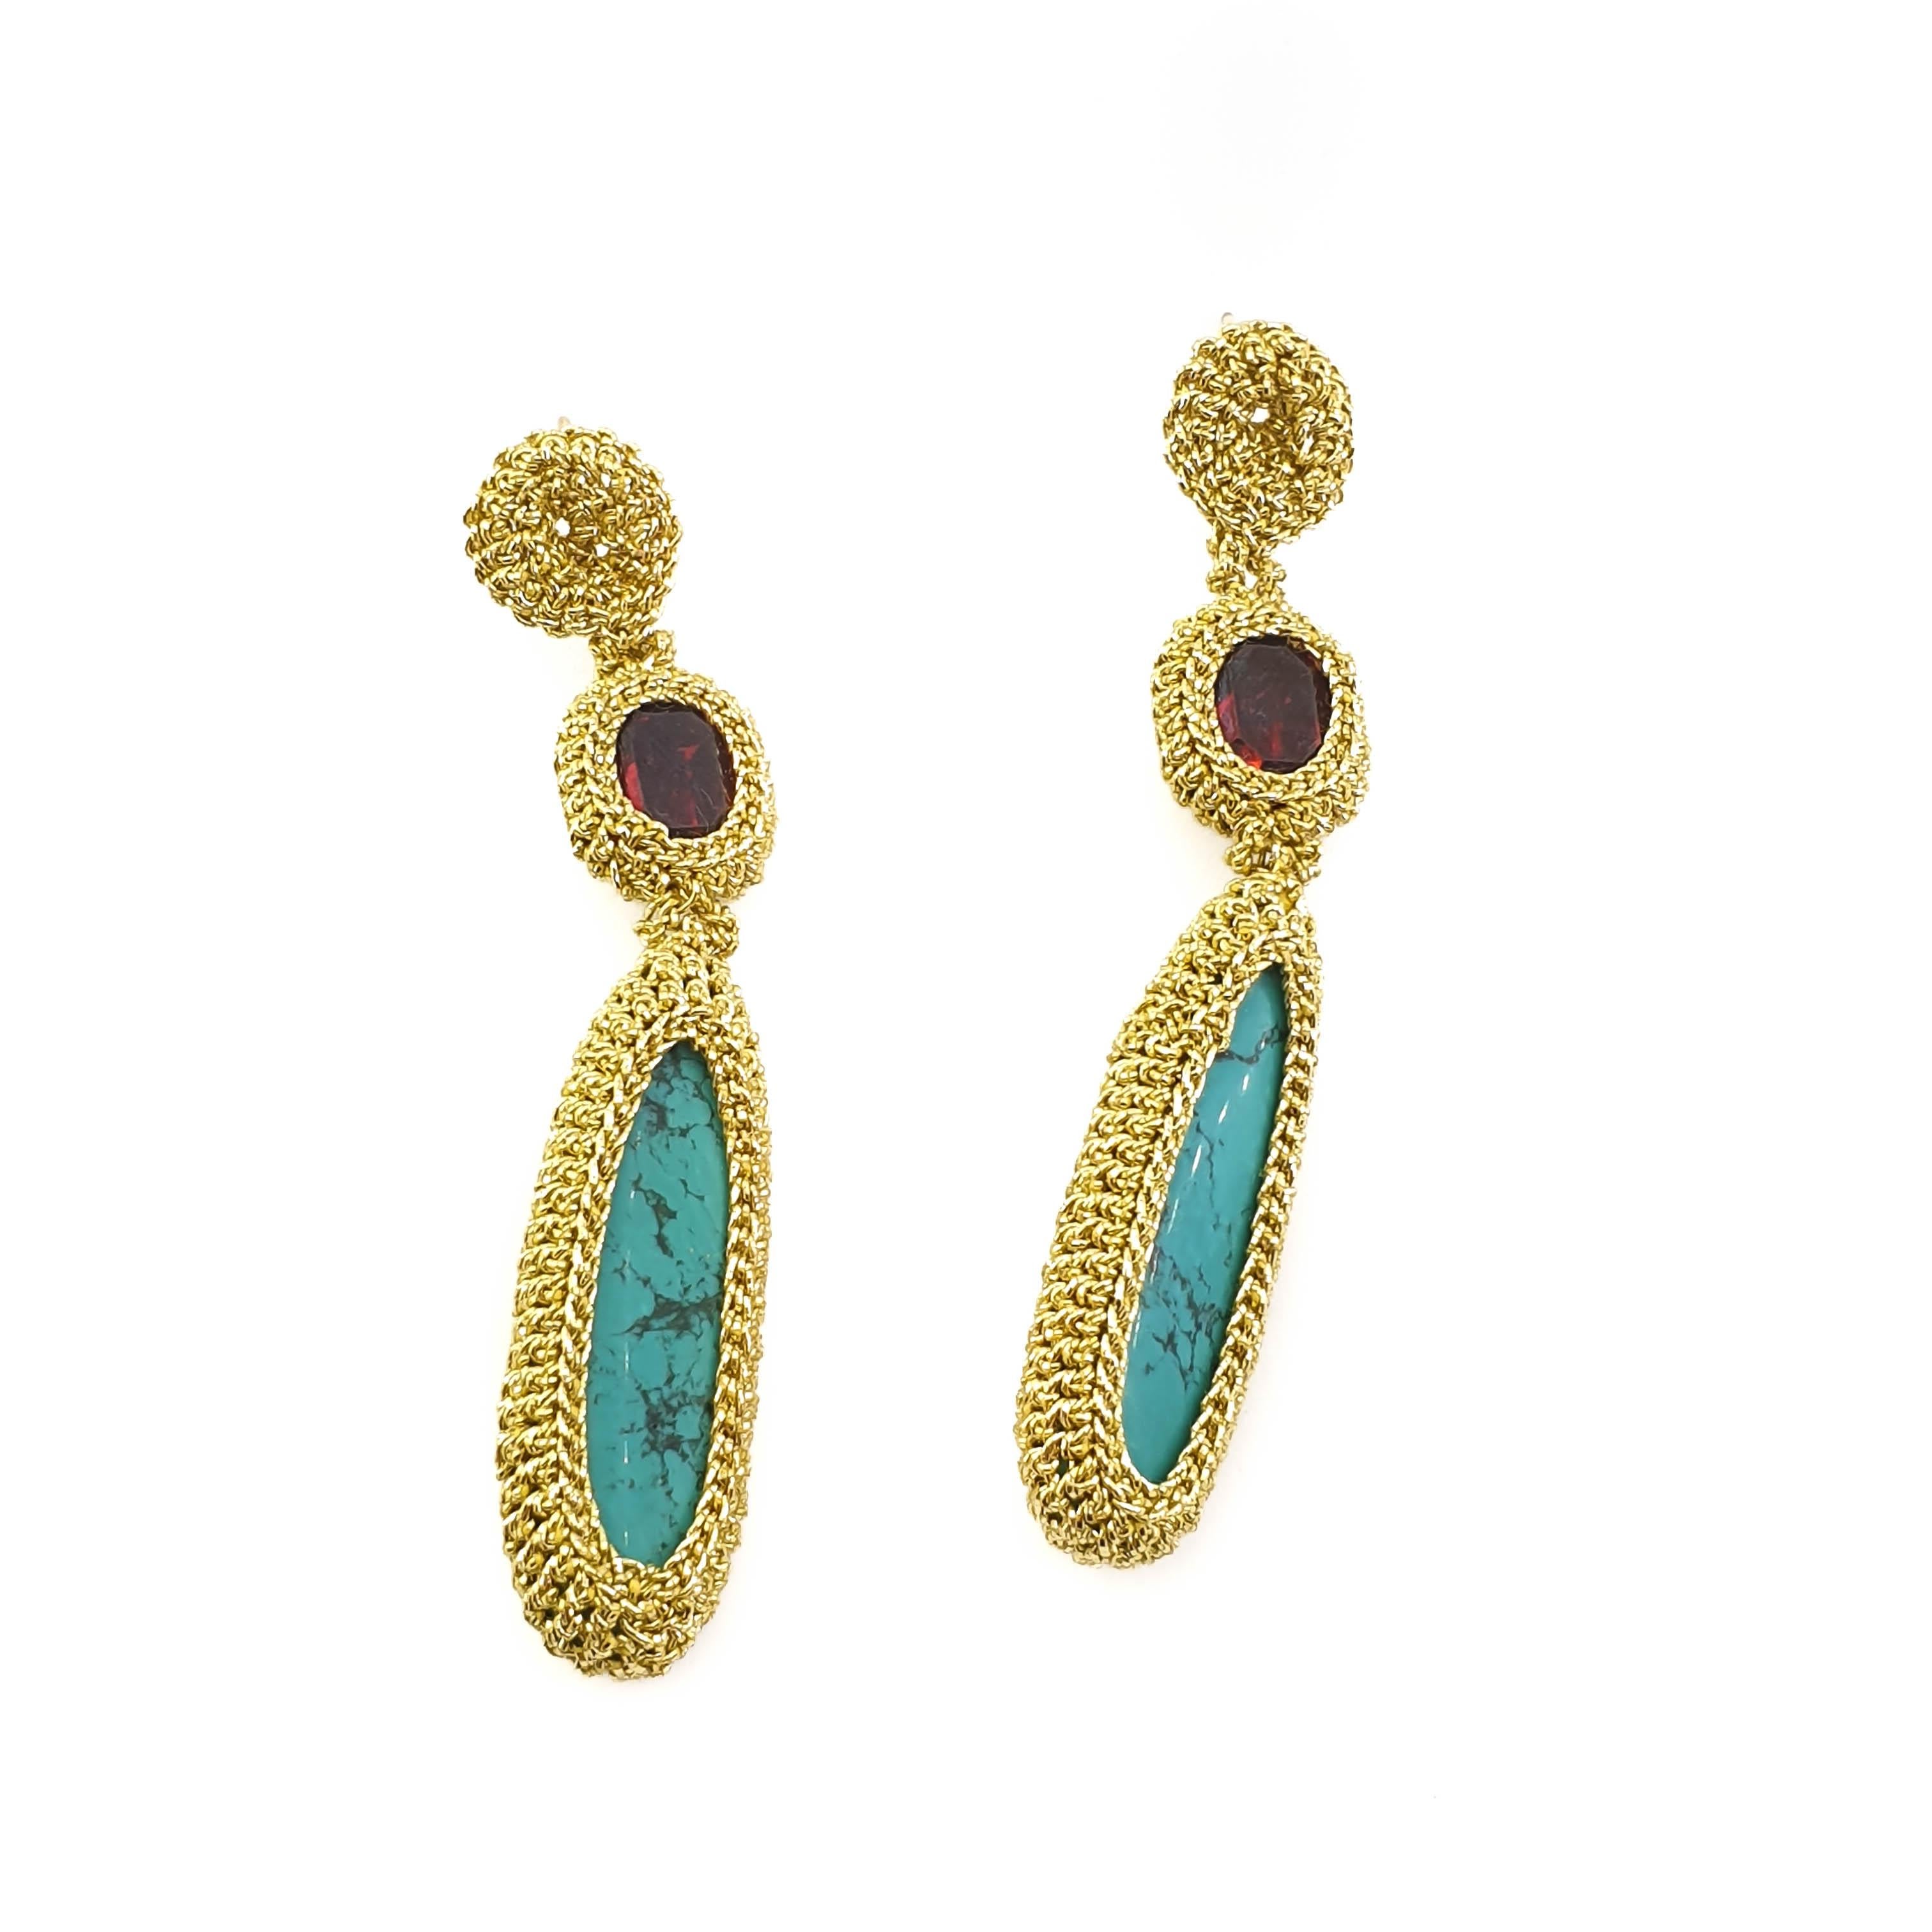 Gold Color Thread Turquoise Red Crystal Dangle Earrings Crochet Artsy Fashion In New Condition For Sale In Kfar Saba, IL